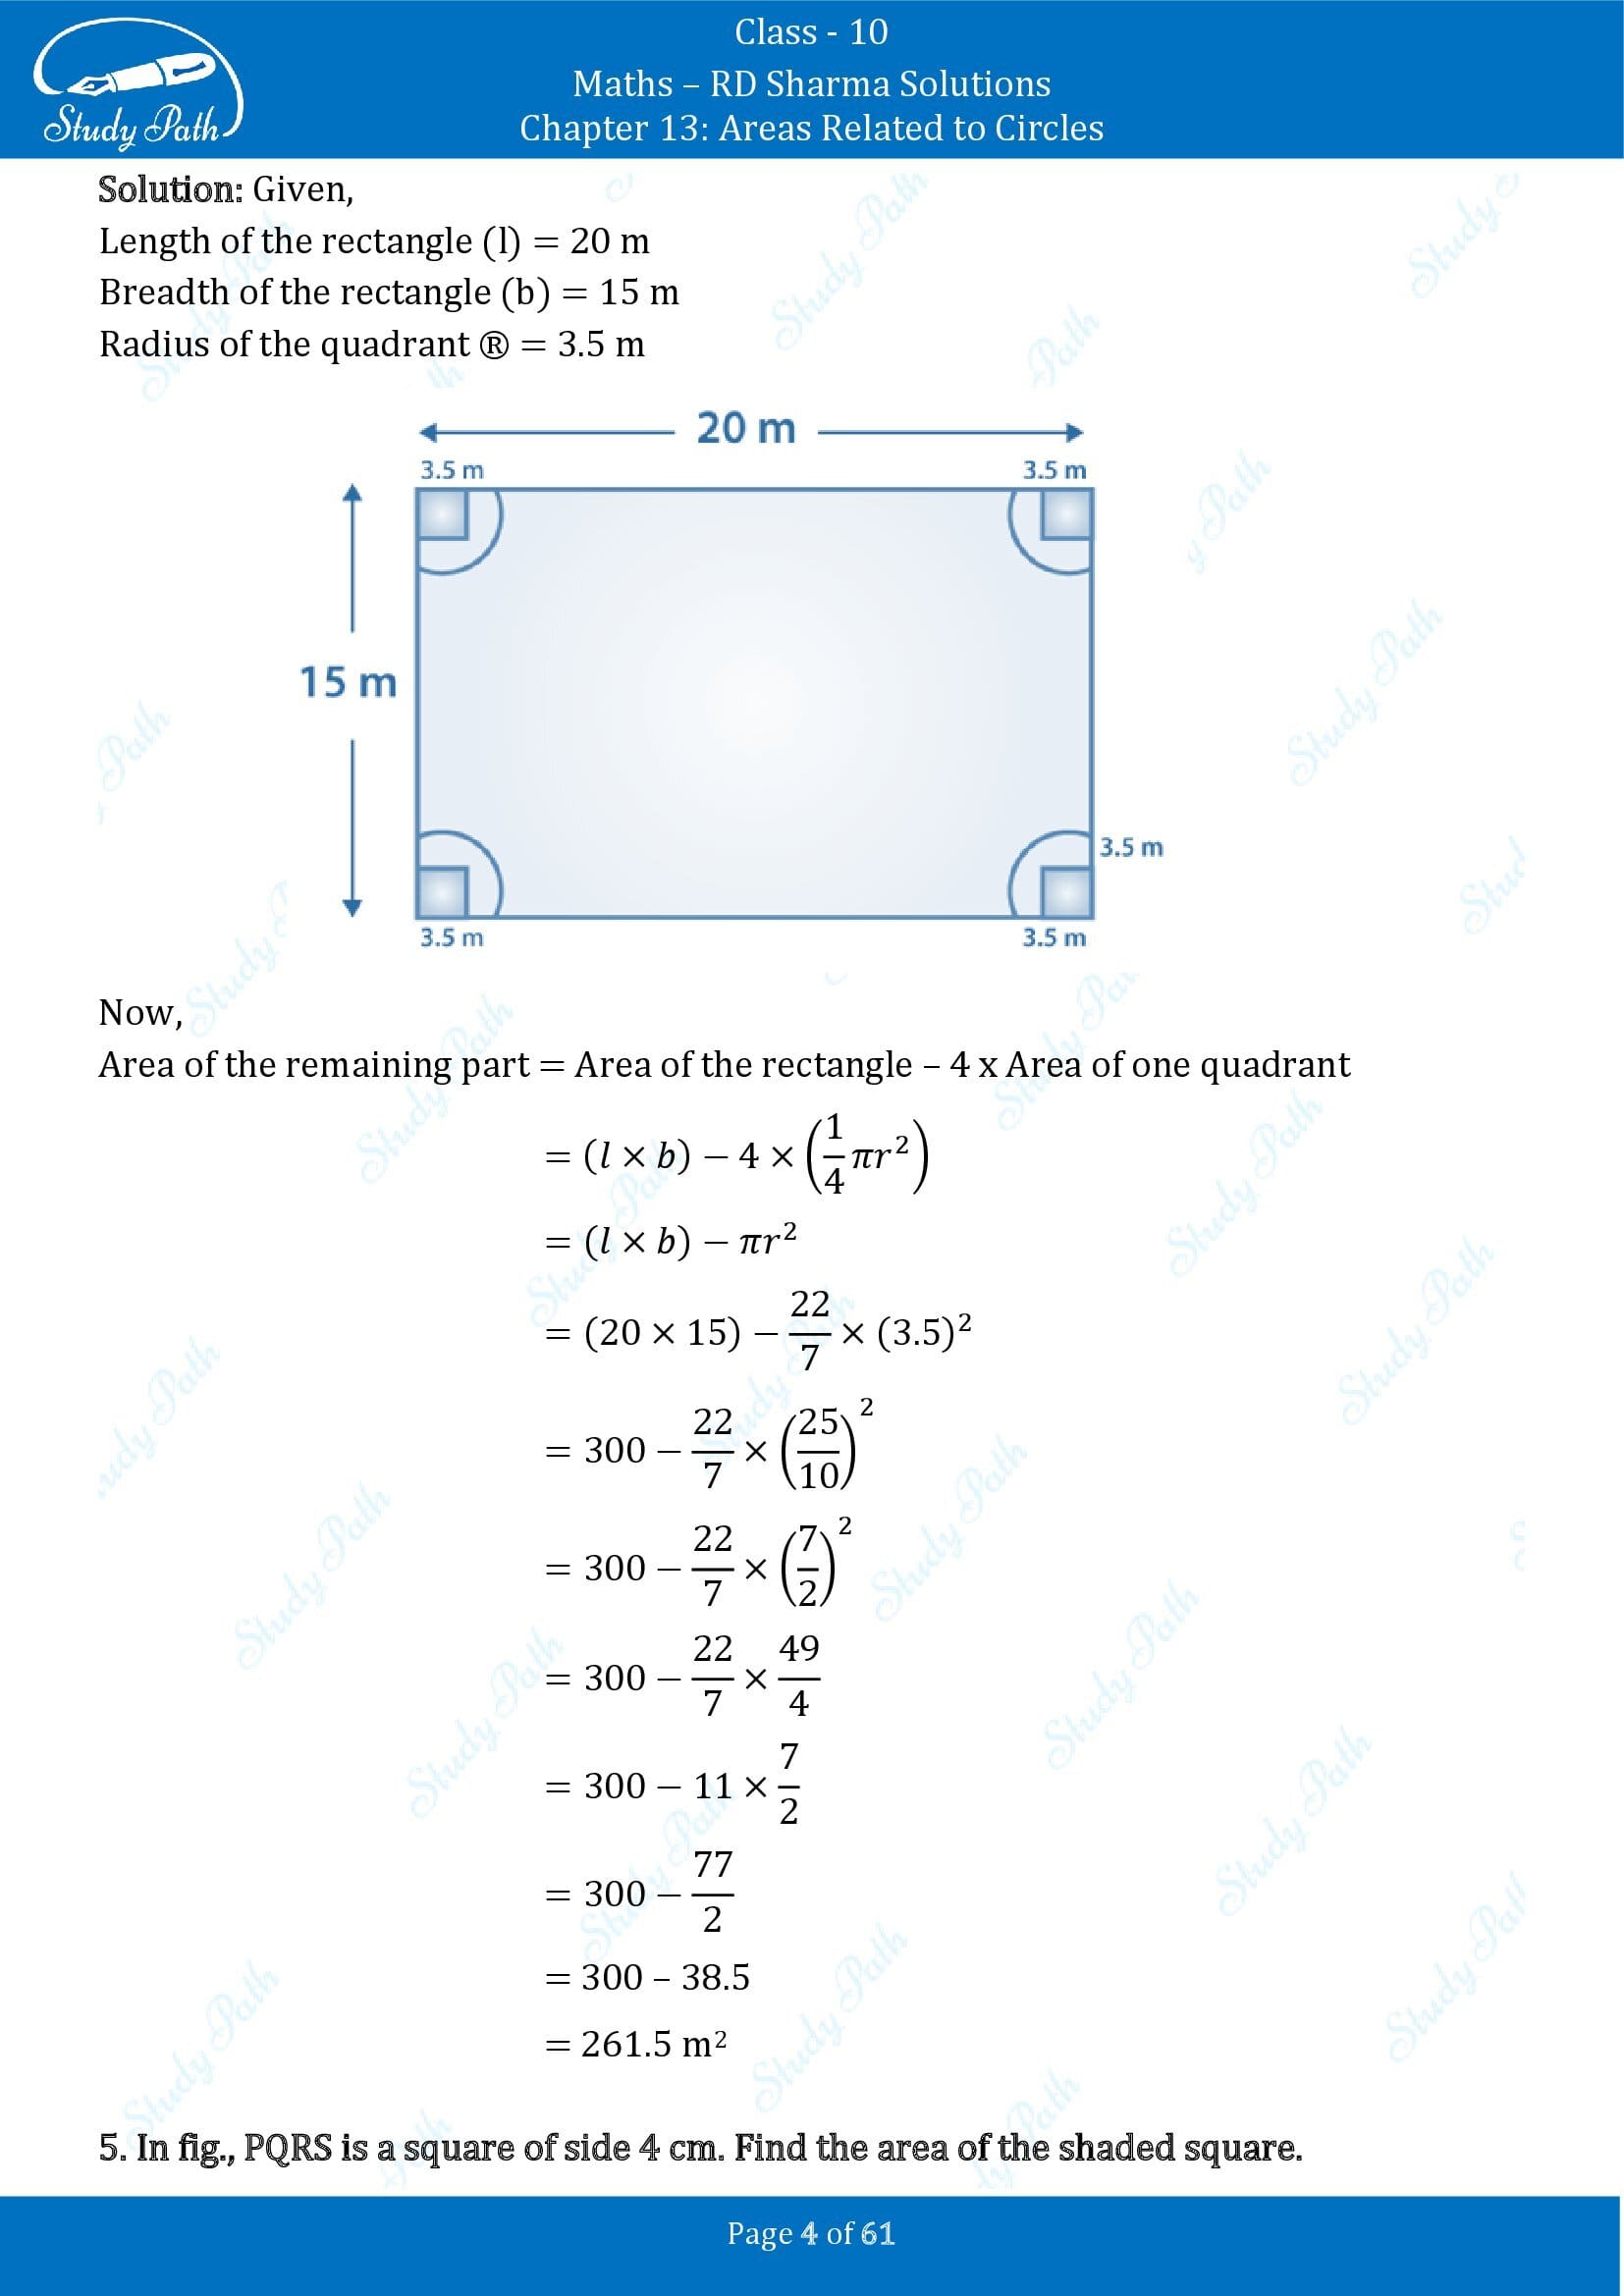 RD Sharma Solutions Class 10 Chapter 13 Areas Related to Circles Exercise 13.4 00004